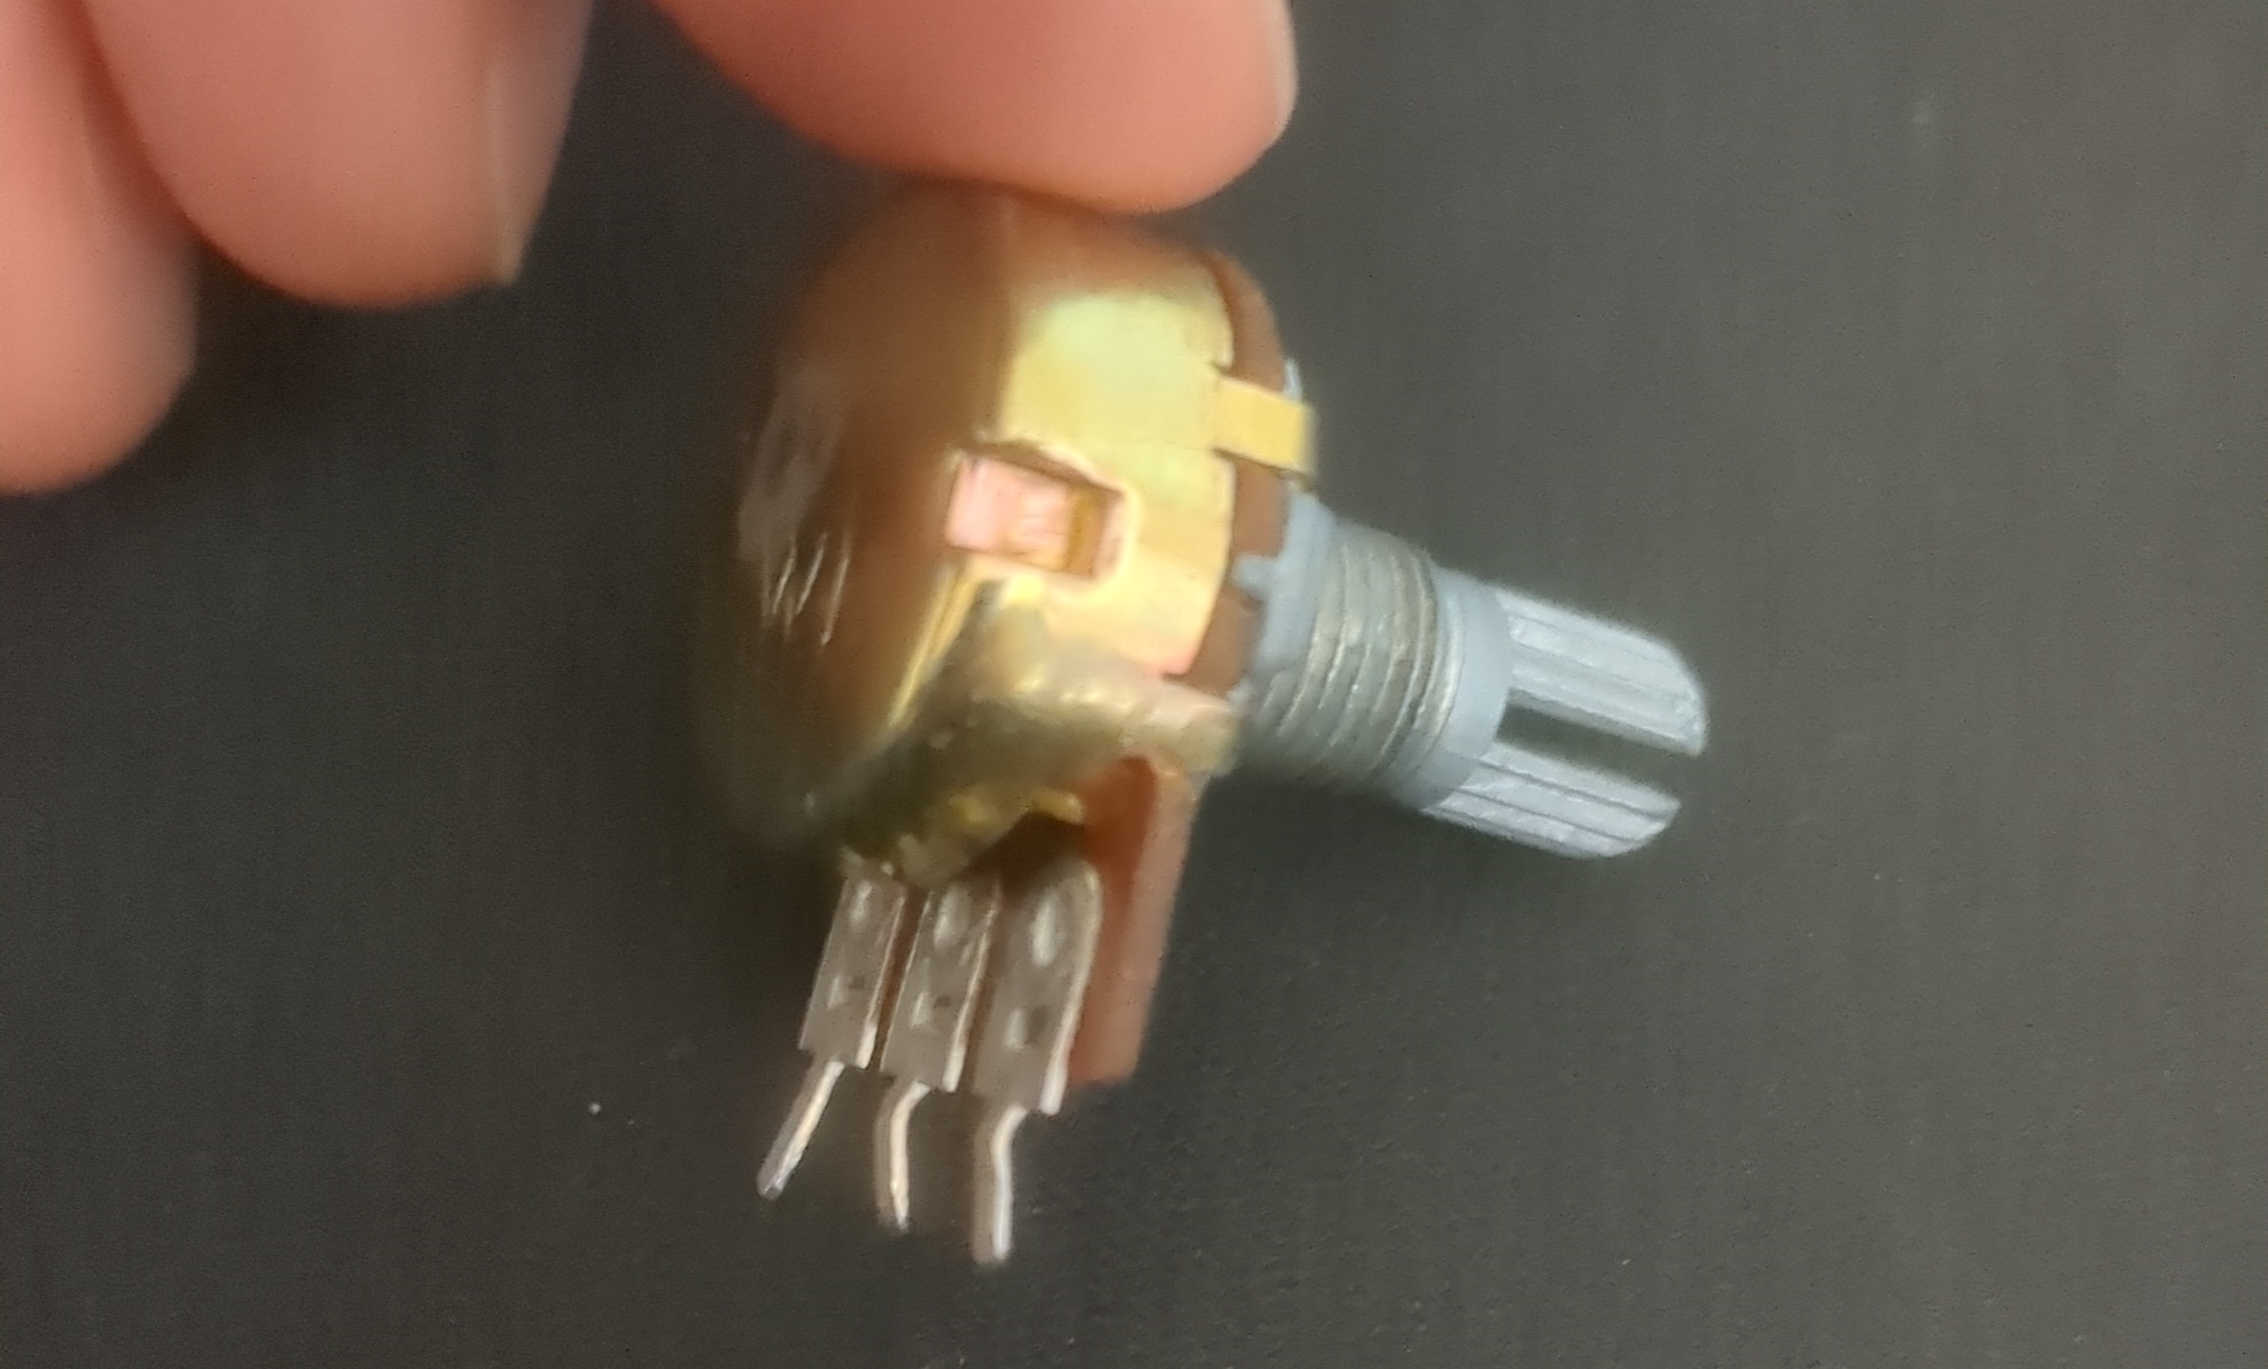 image of potentiometer with leads marked